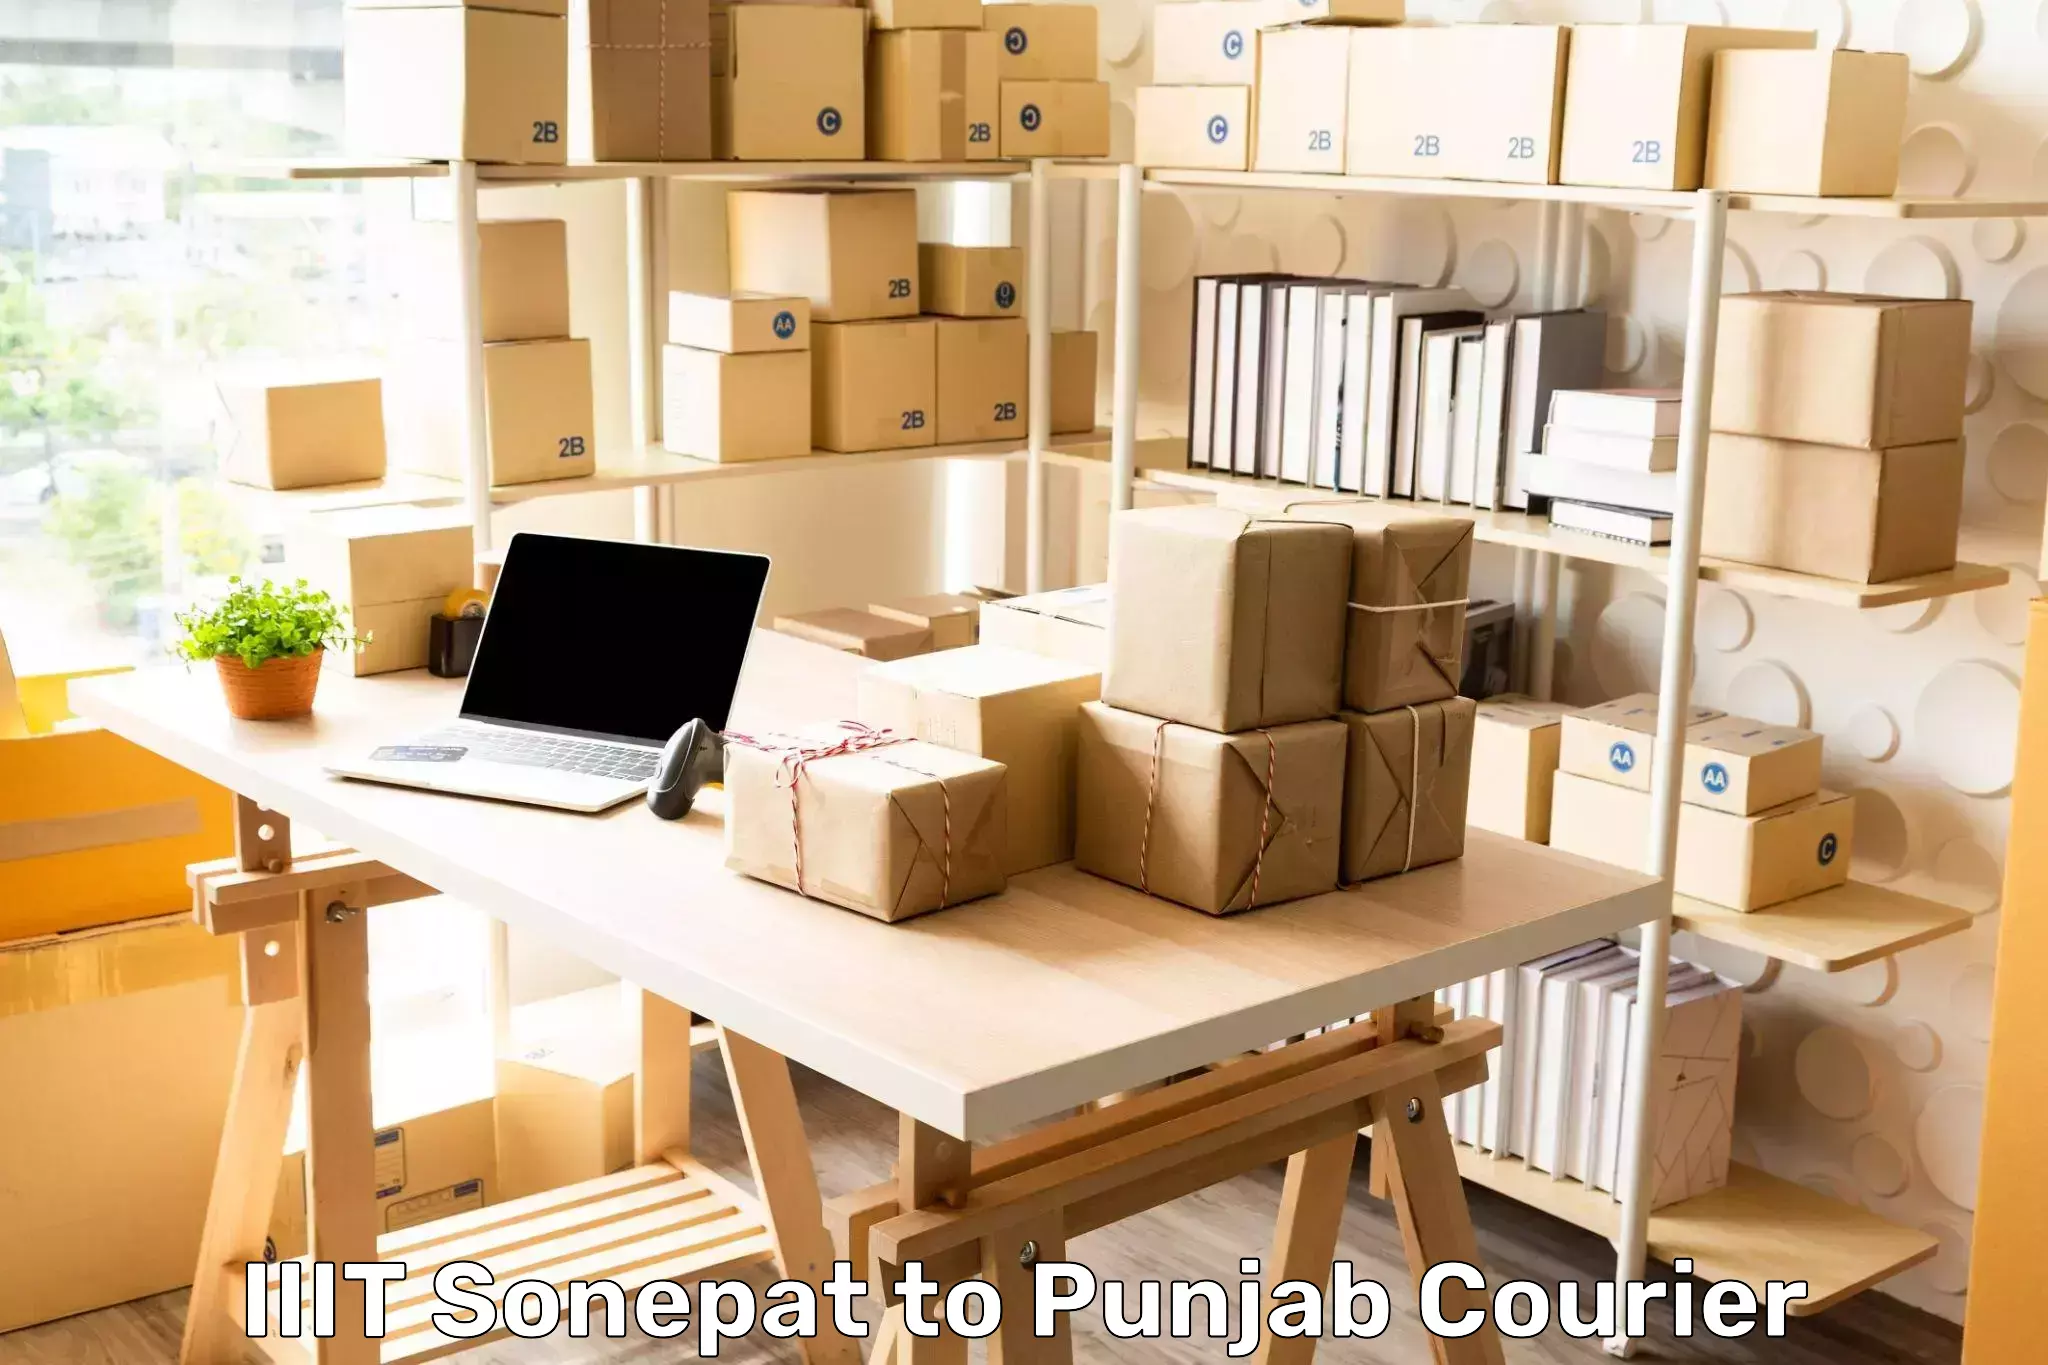 Optimized delivery routes IIIT Sonepat to Punjab